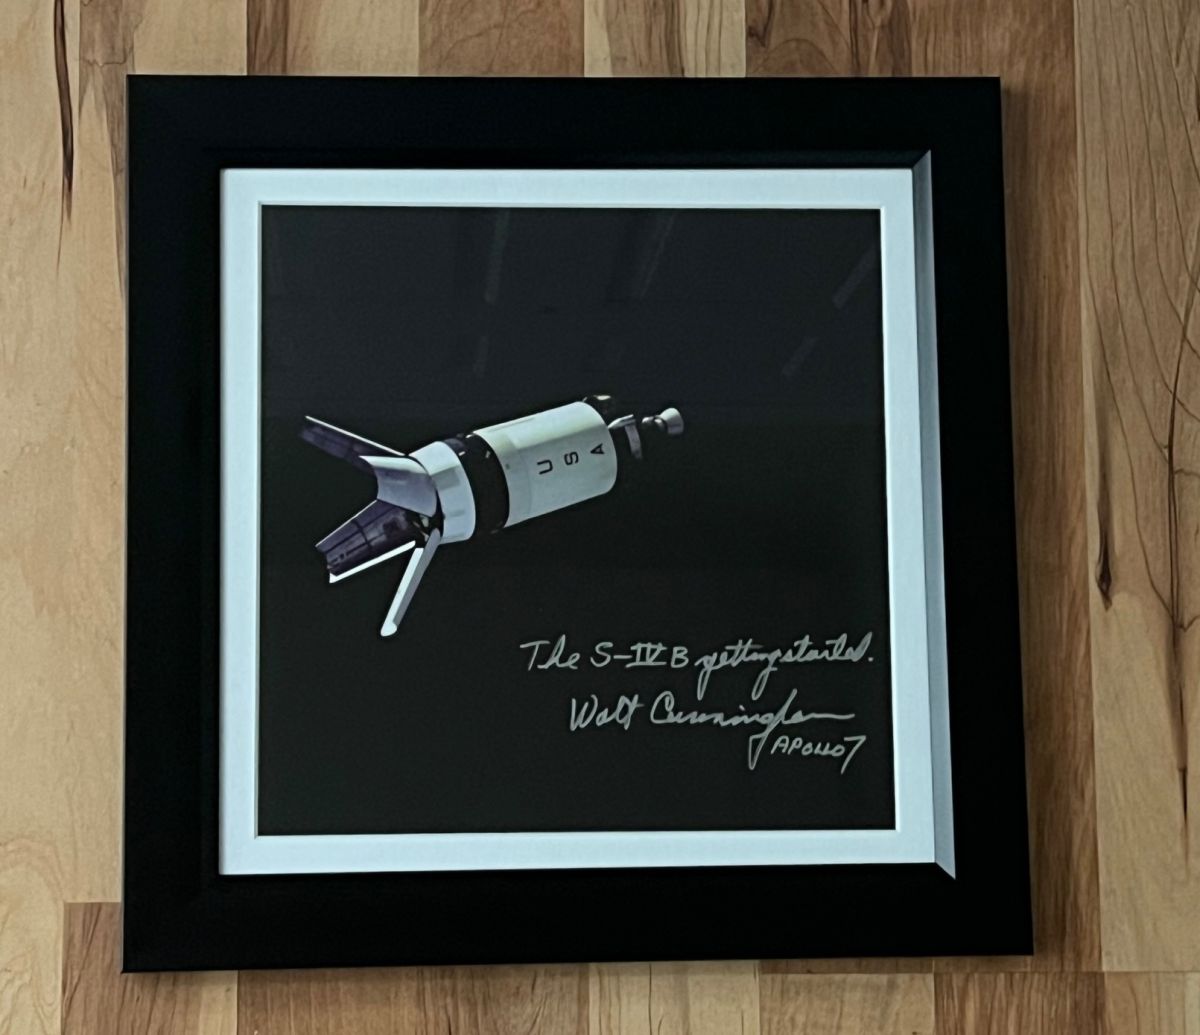 Walt Cunningham signed and Framed 12'' X 12'' S-IV B GLOSSY - ANNOTATED - The Space Store